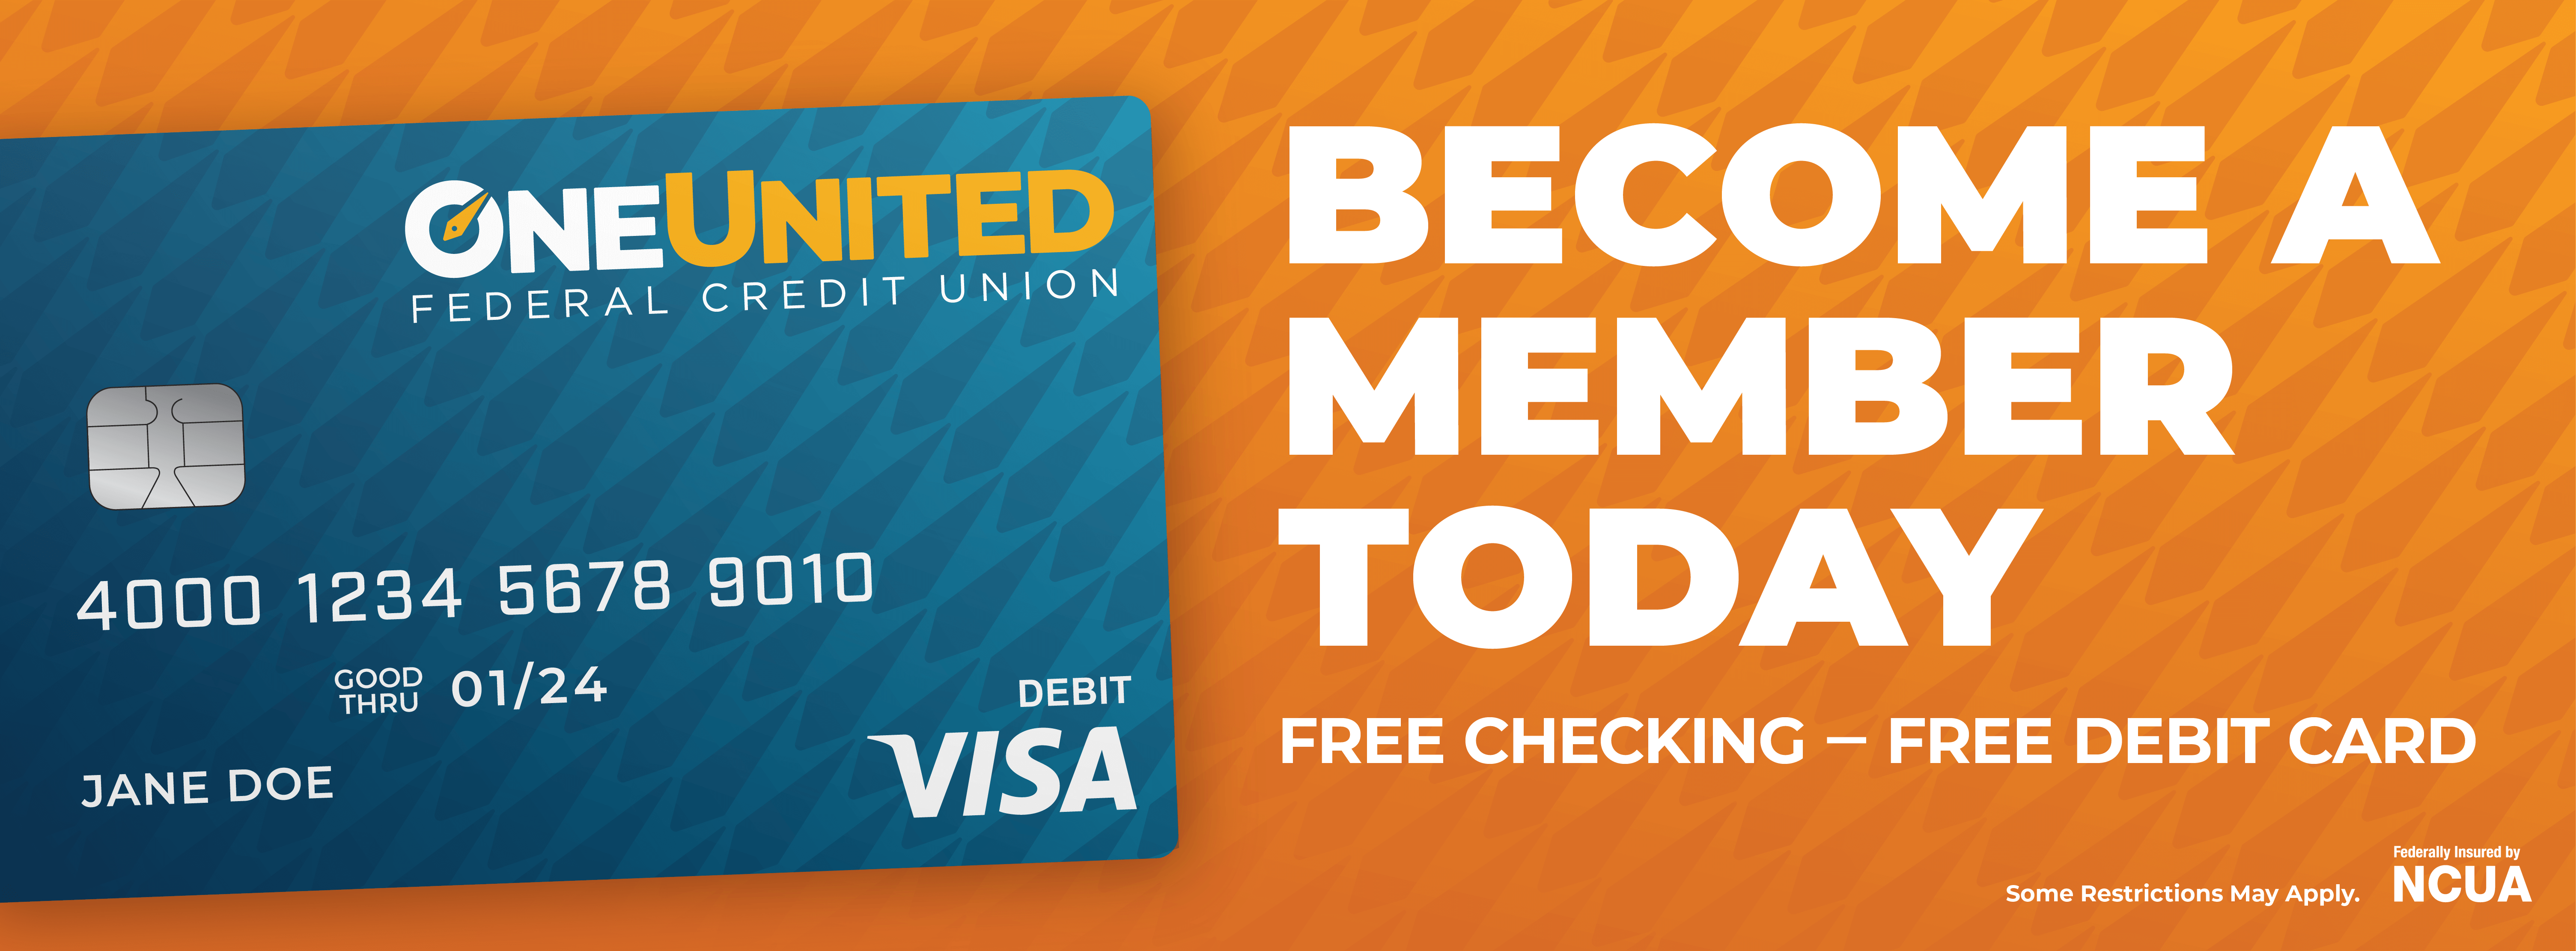 Become a Member Today - Free Checking. Free Debit Card. 